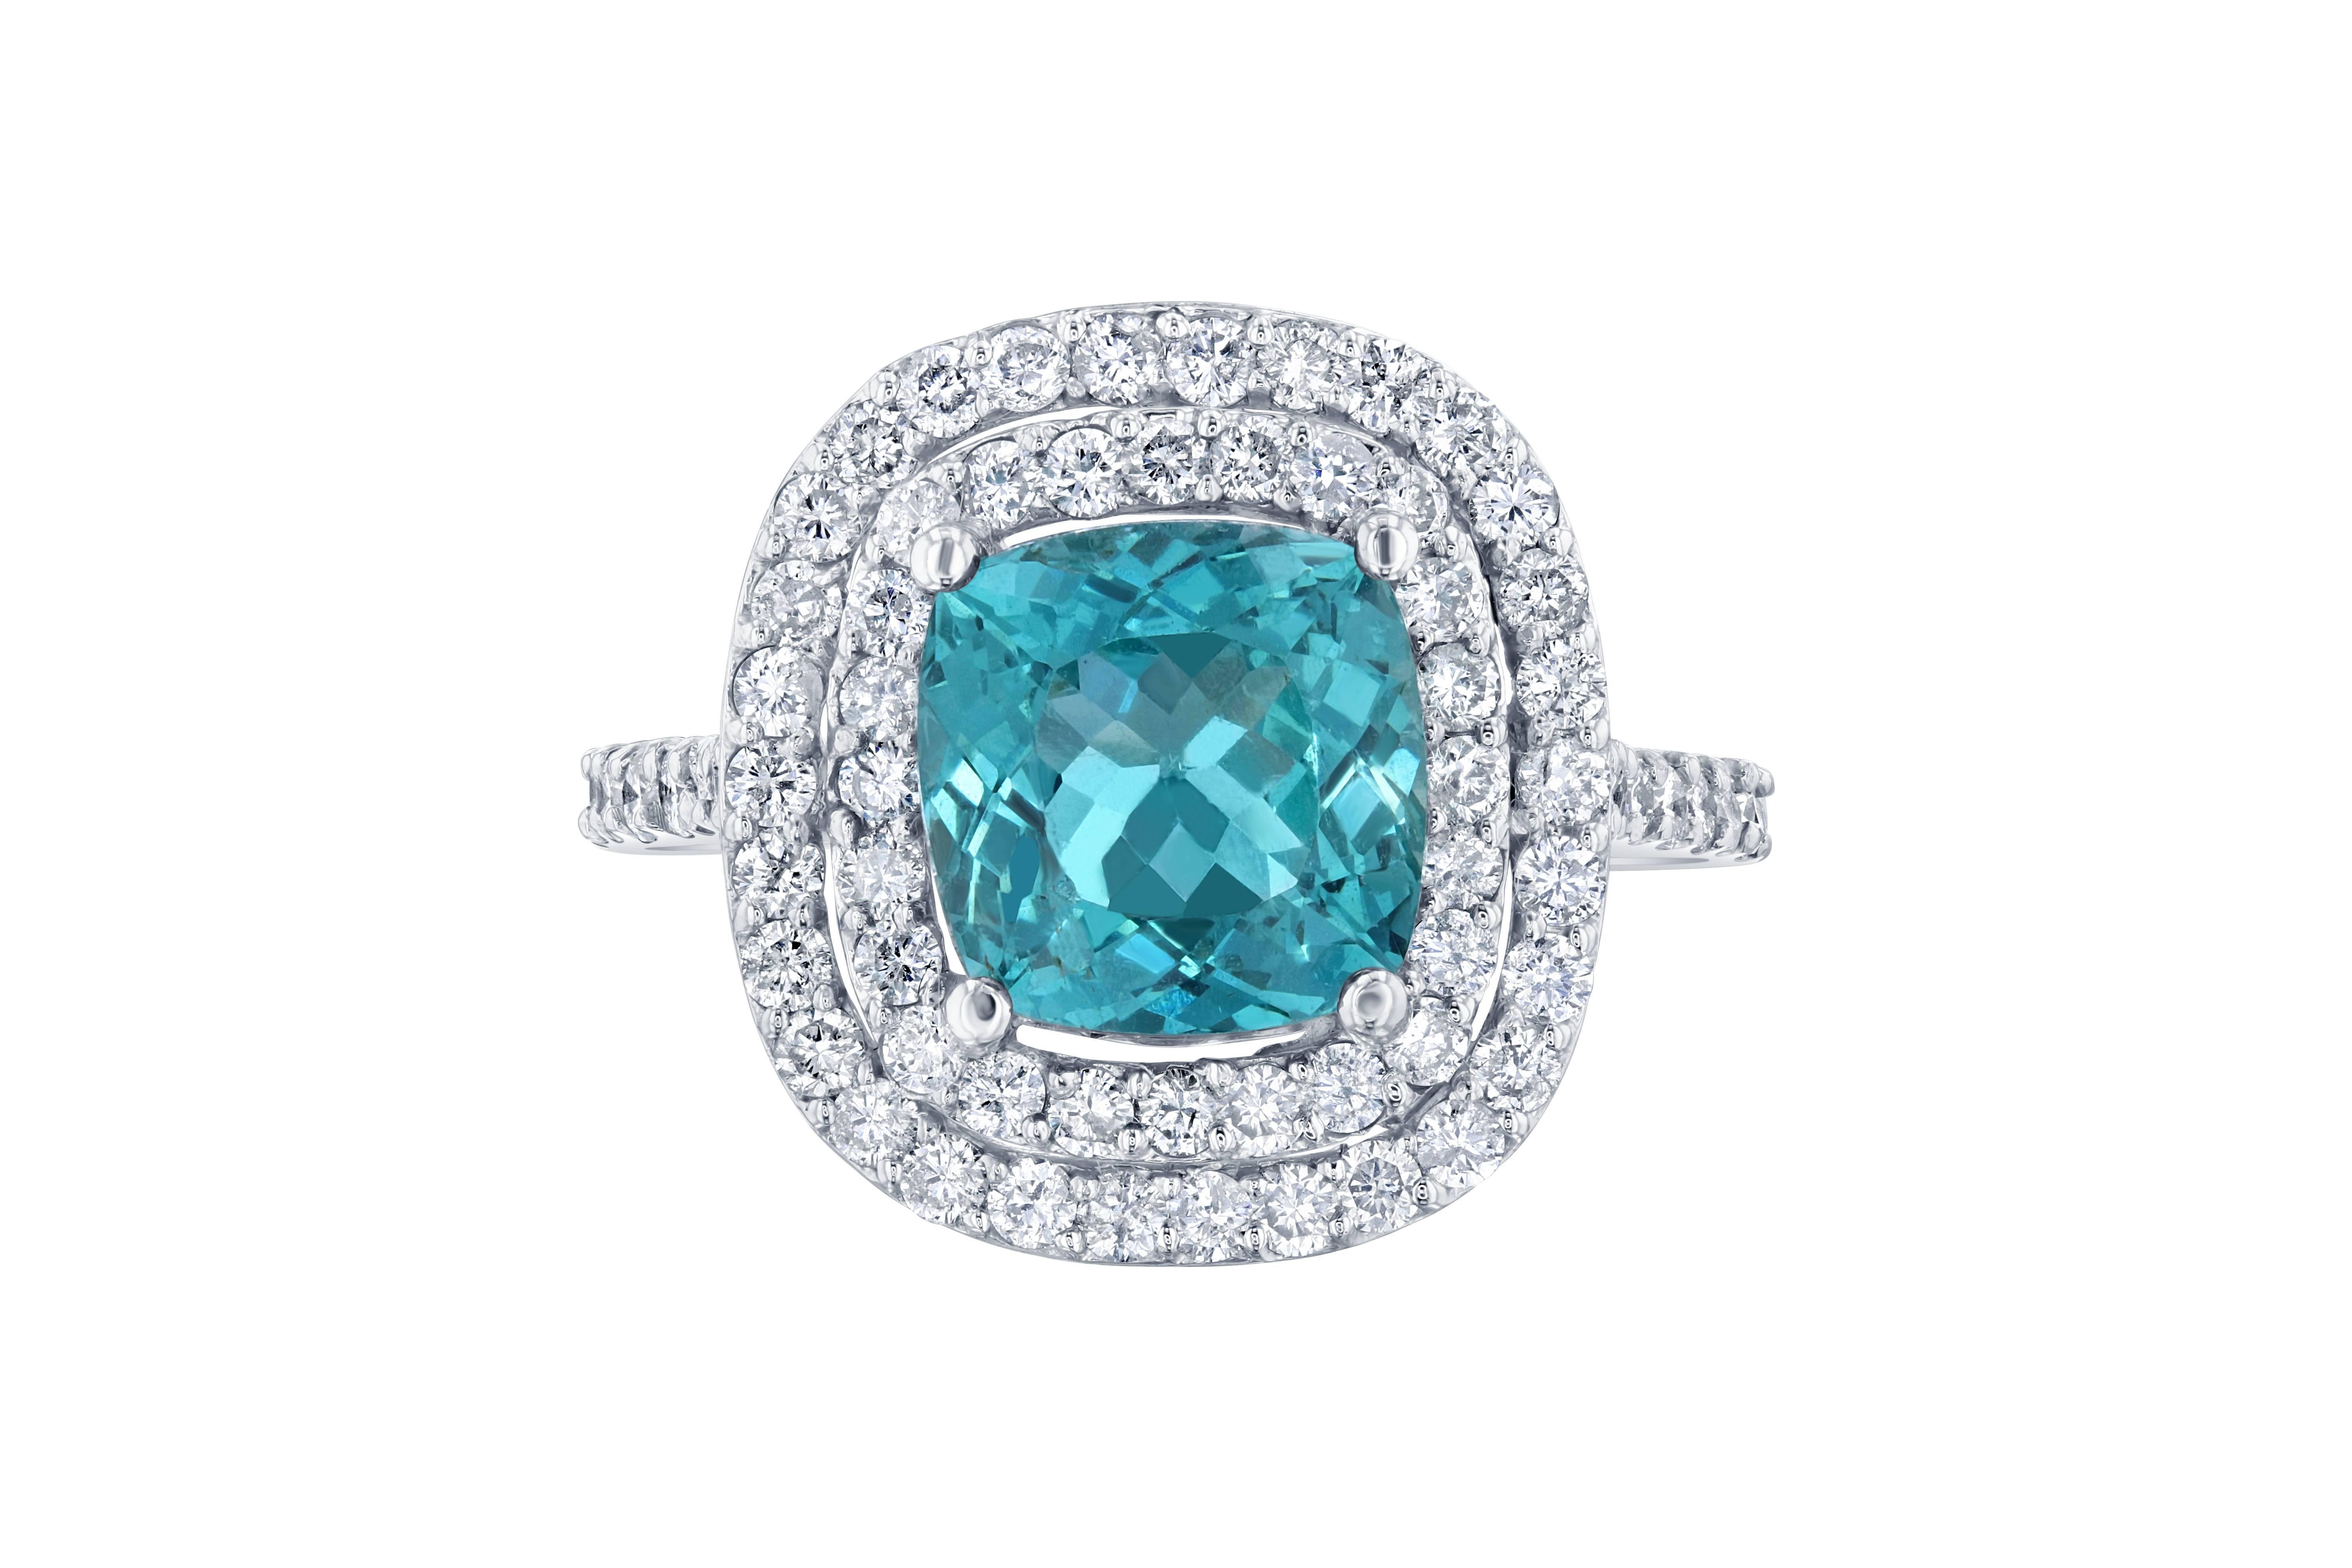 Gorgeous Double Halo Apatite and Diamond Ring.  This ring has a 3.36 carat Apatite in the center of the ring and is surrounded by a double halo of 76 Round Cut Diamonds that weigh 0.97 carat.  The total carat weight of the ring is 4.33 carats.  The